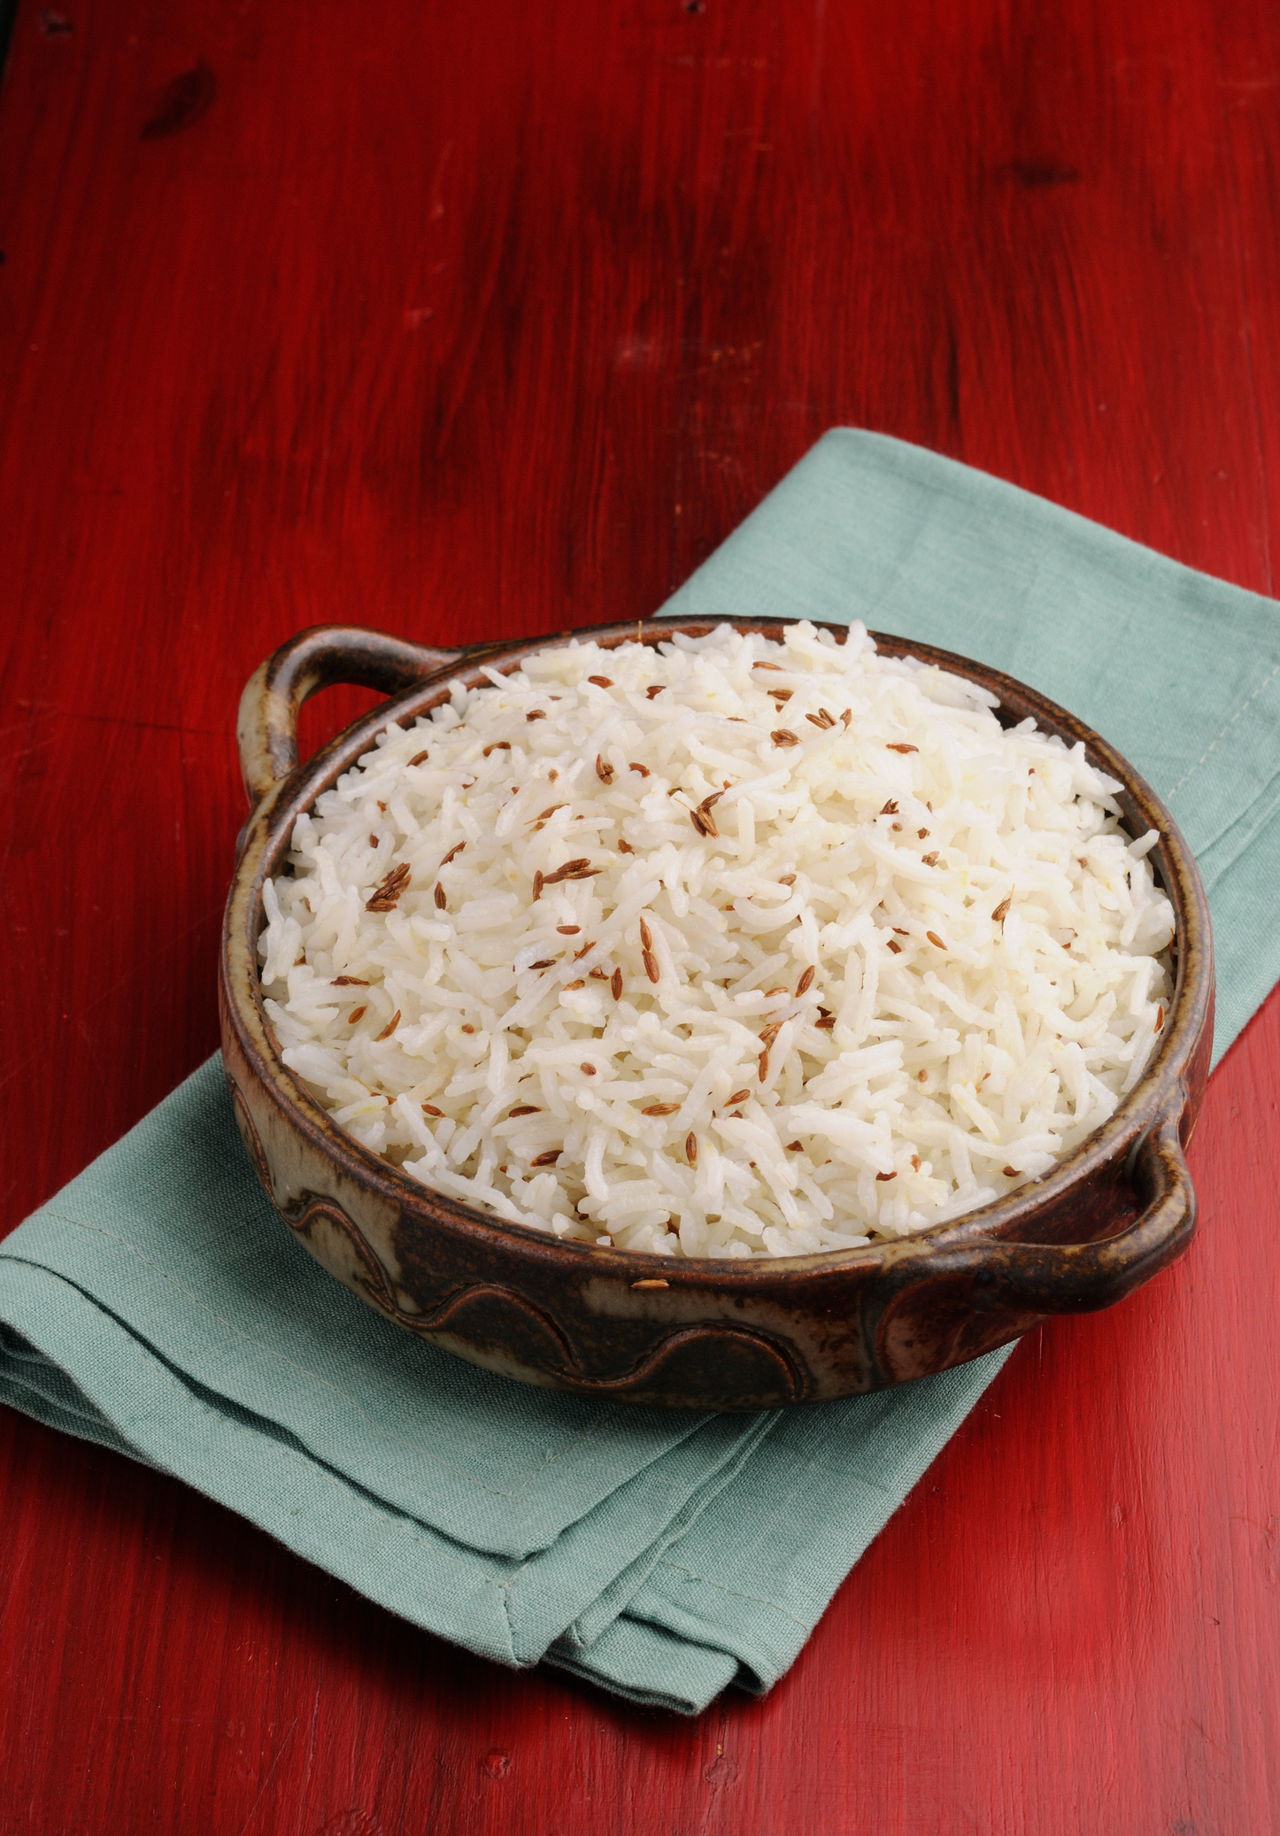 Cautious Cooking: Know the Rice to Water Ratio in Rice ...